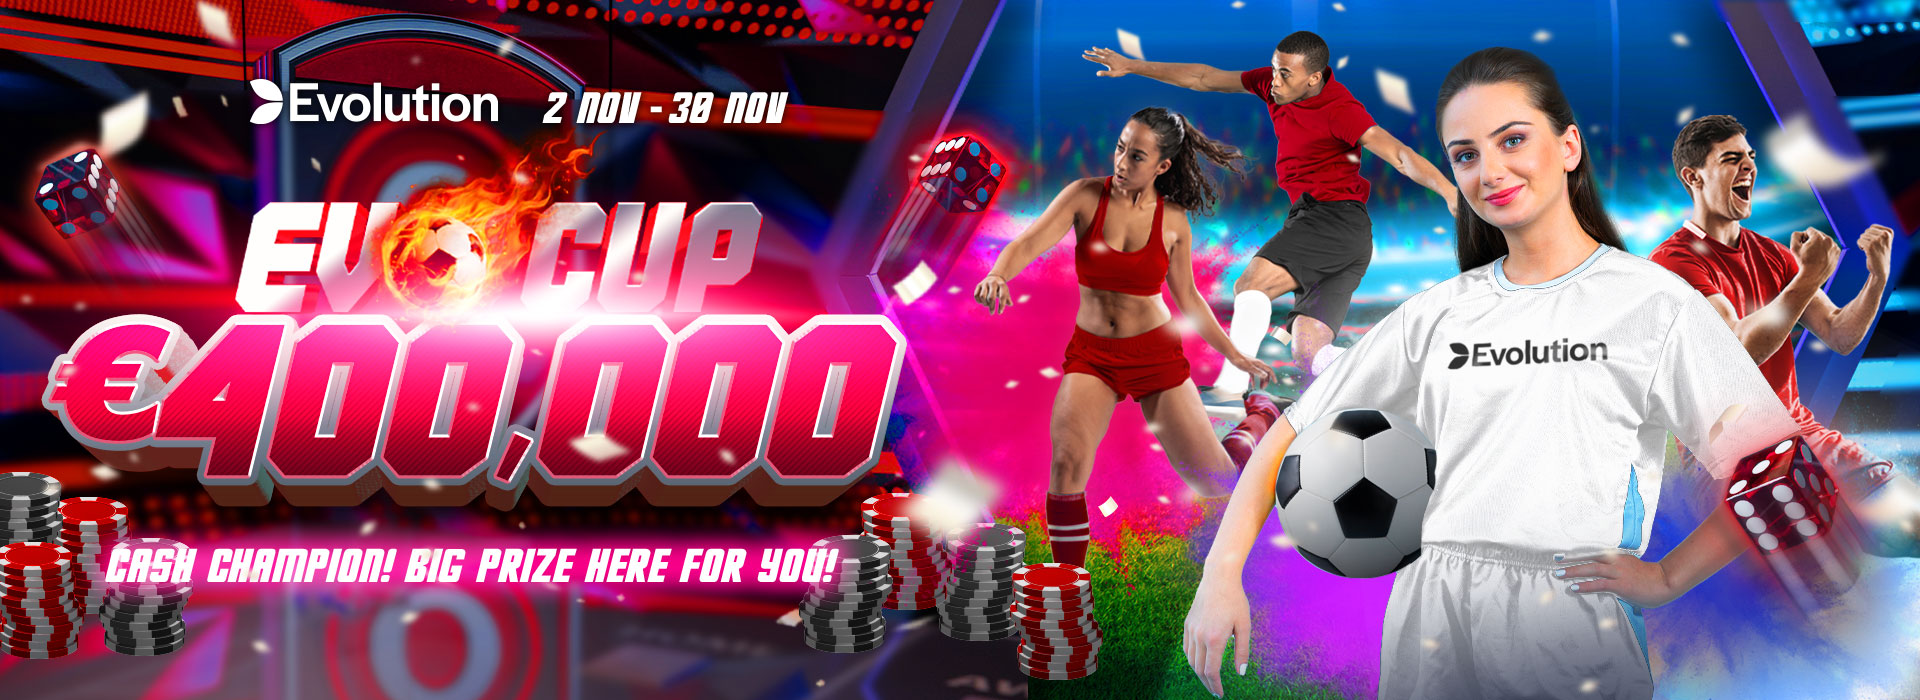 Evo Cup Cash Champion Big Prize here for you Web Banner - GamingSoft